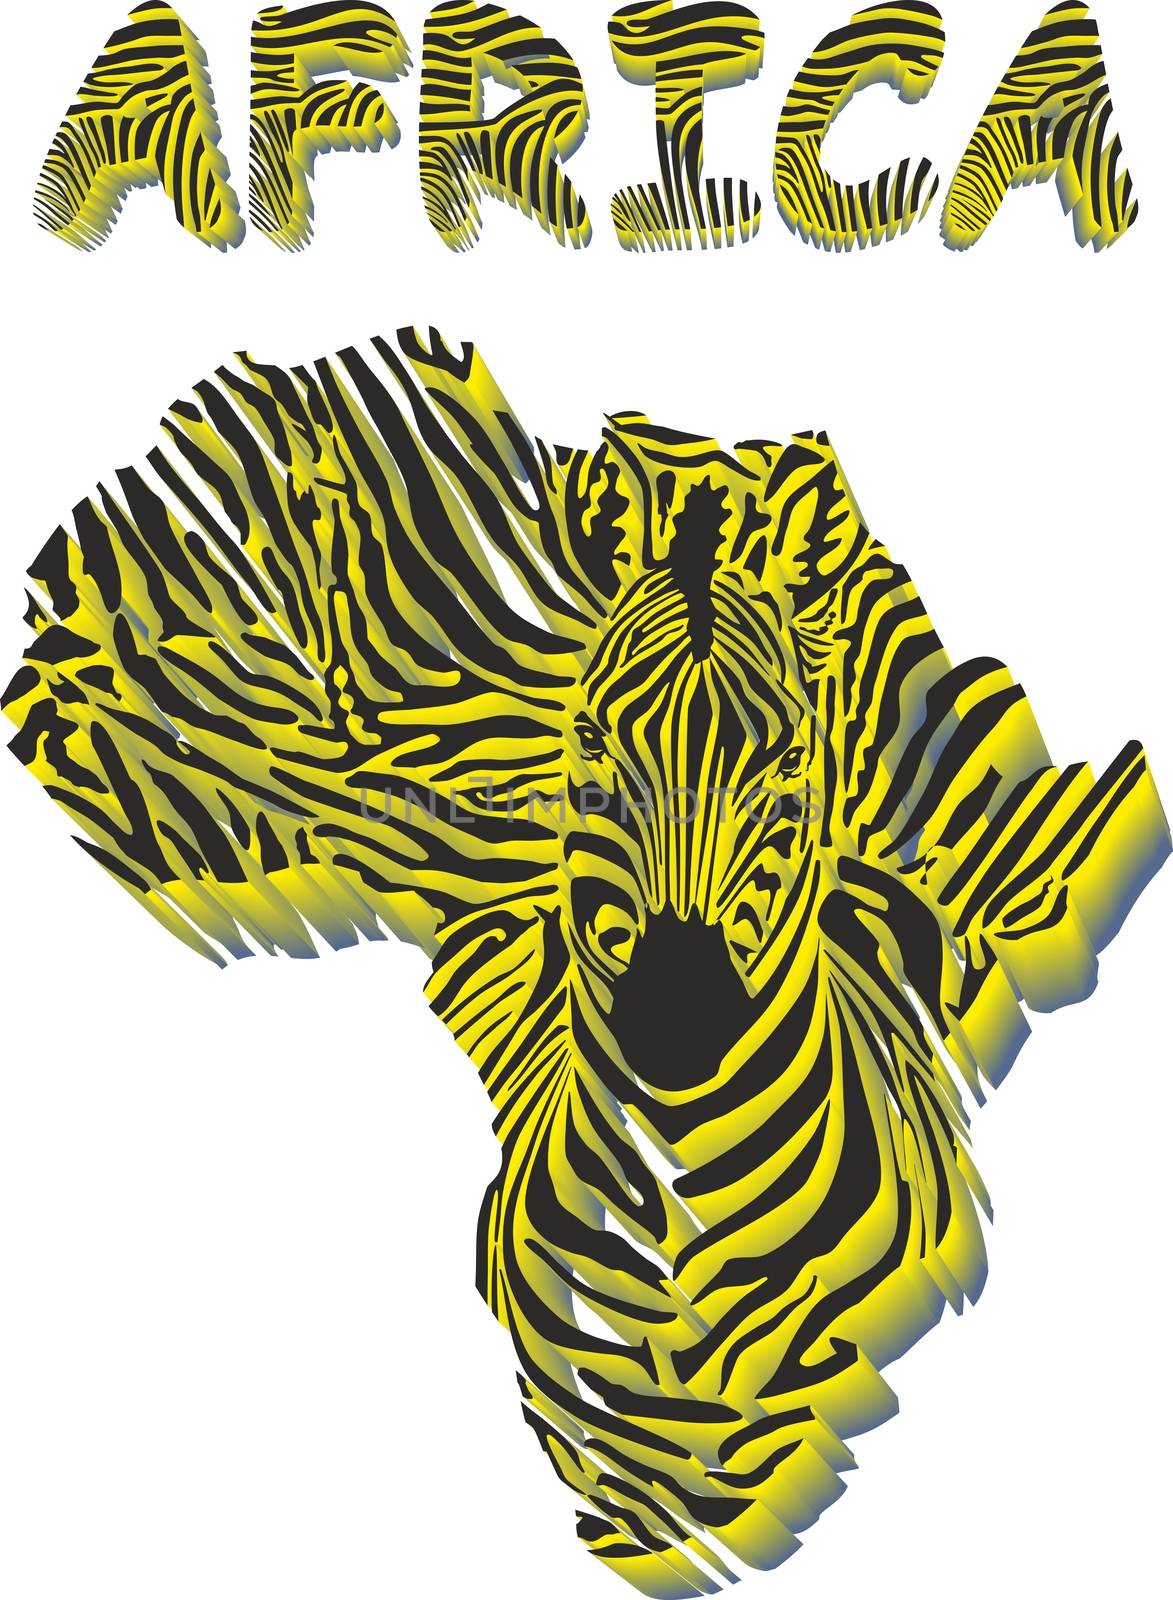 illustration of abstract Africa as a zebra skin and head